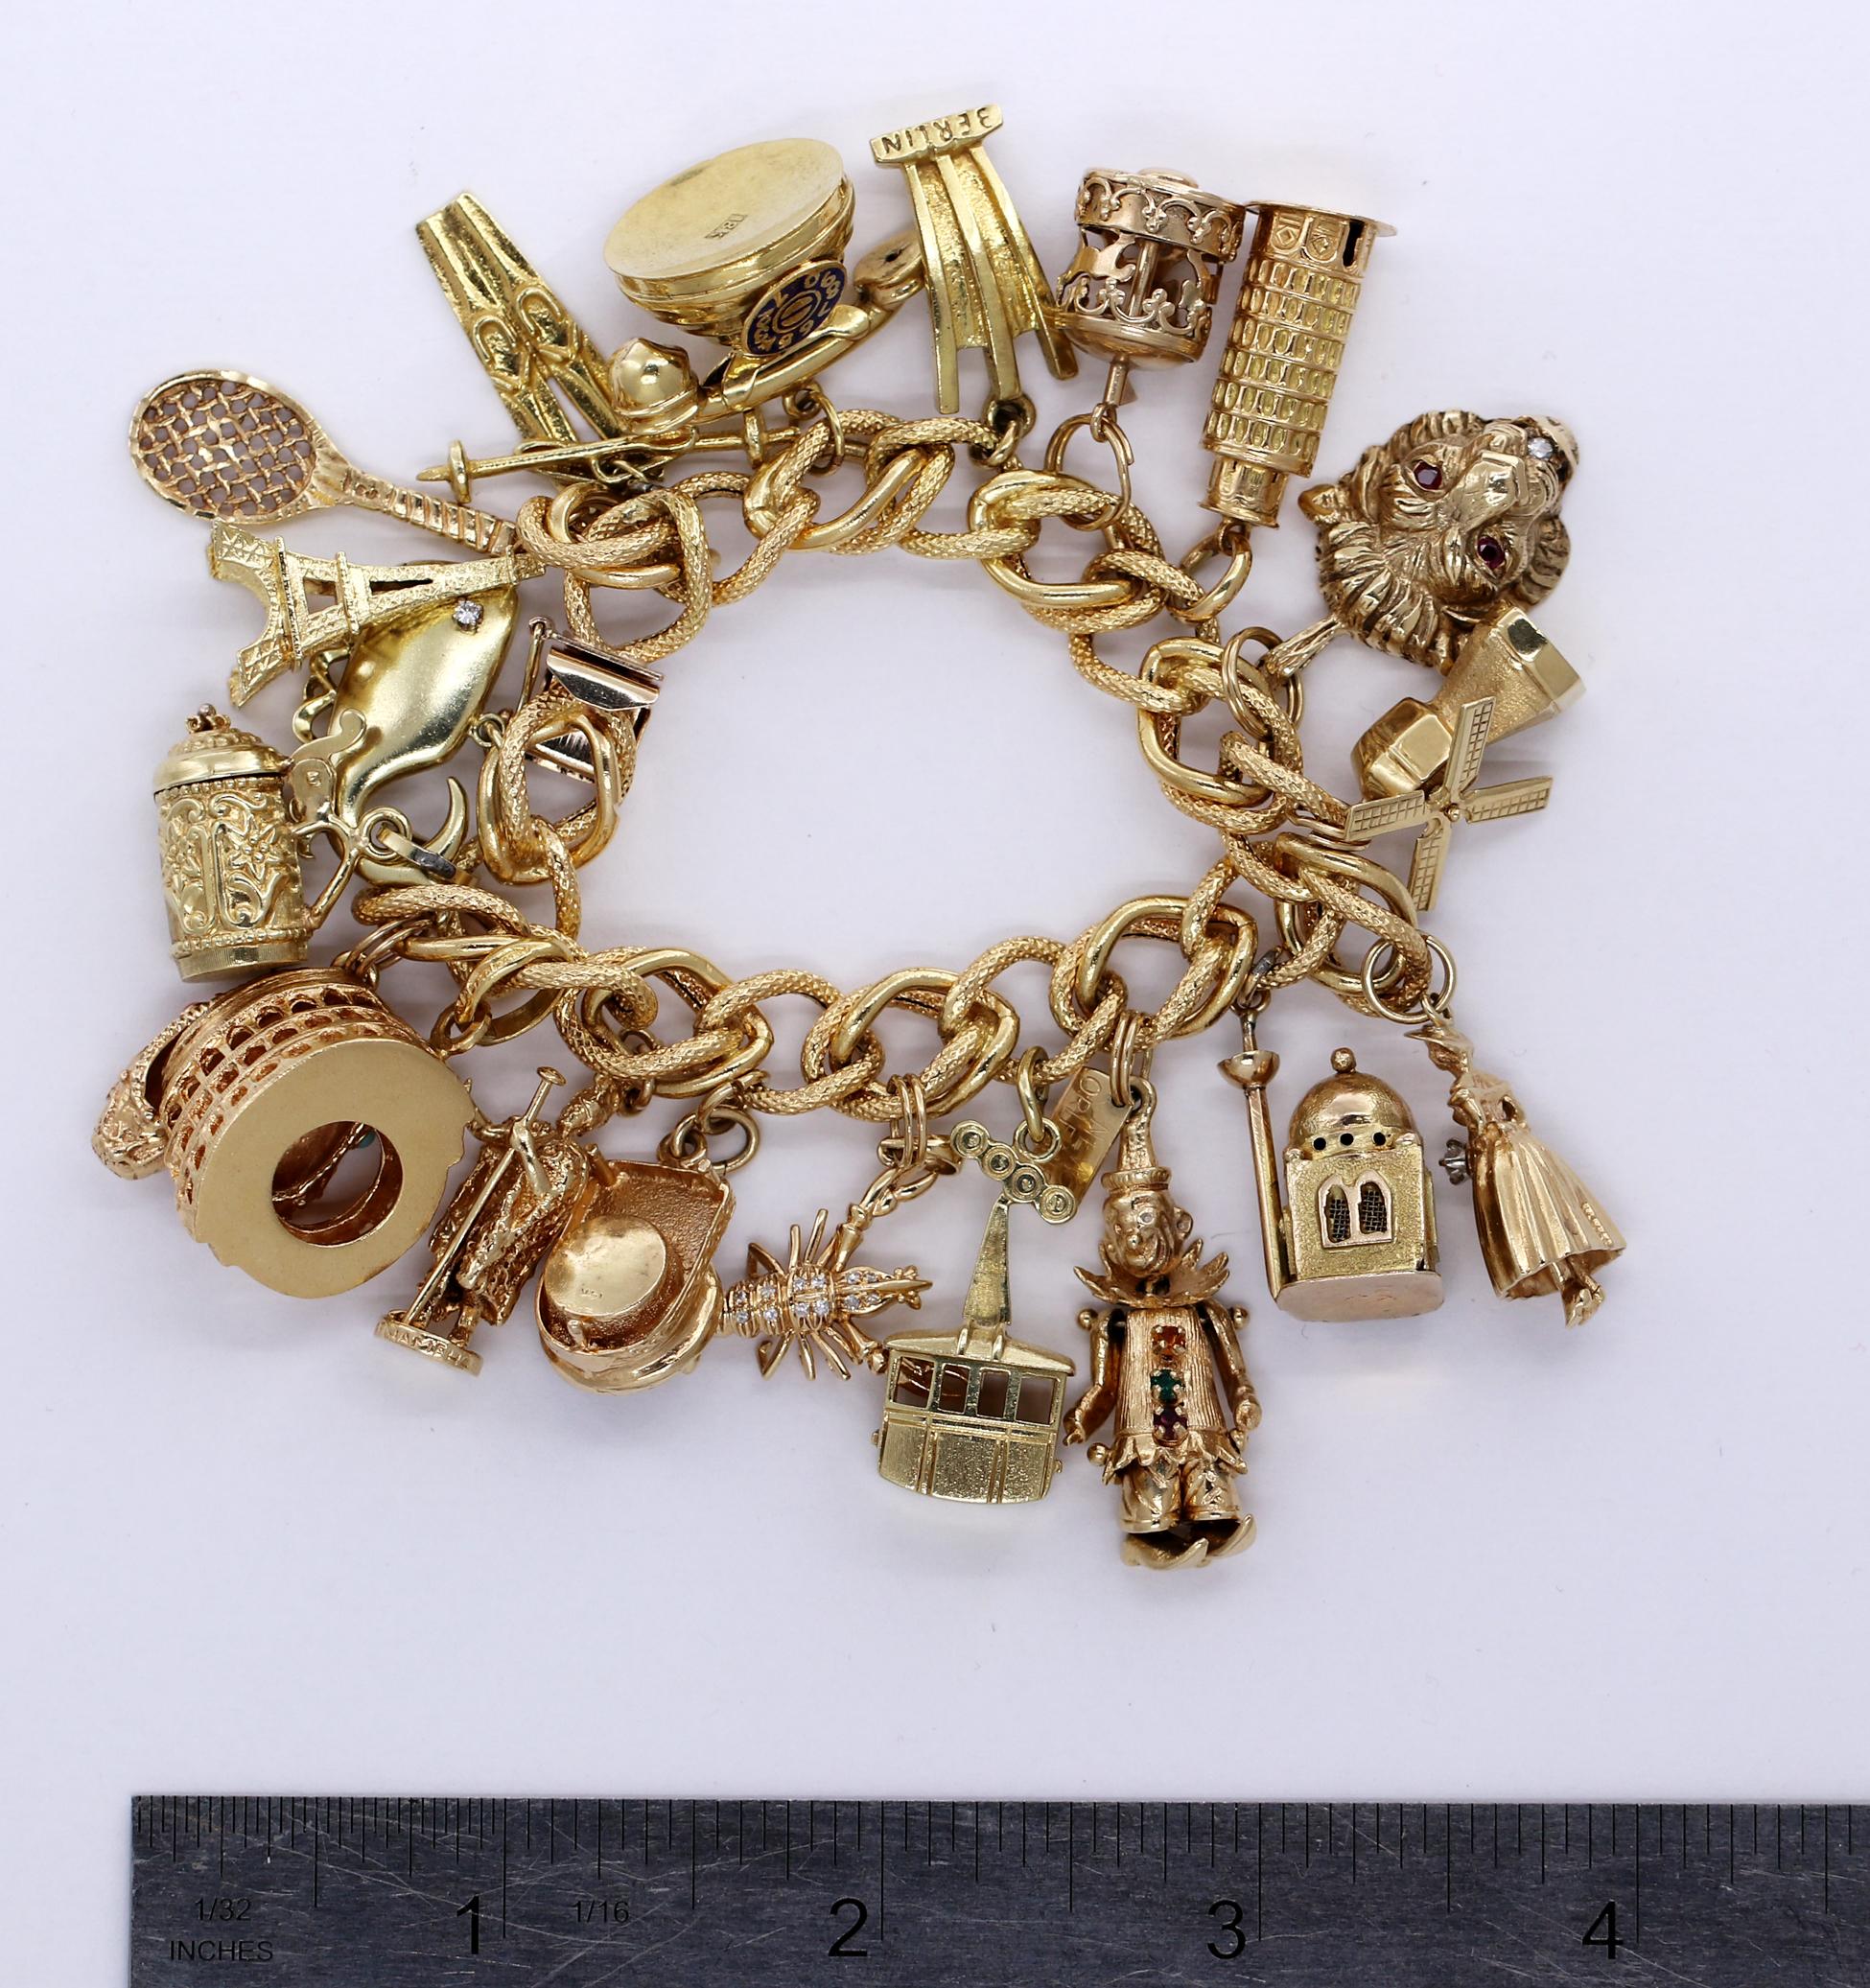 Midcentury Gold Charm Bracelet with 20 Travel Themed Charms 3